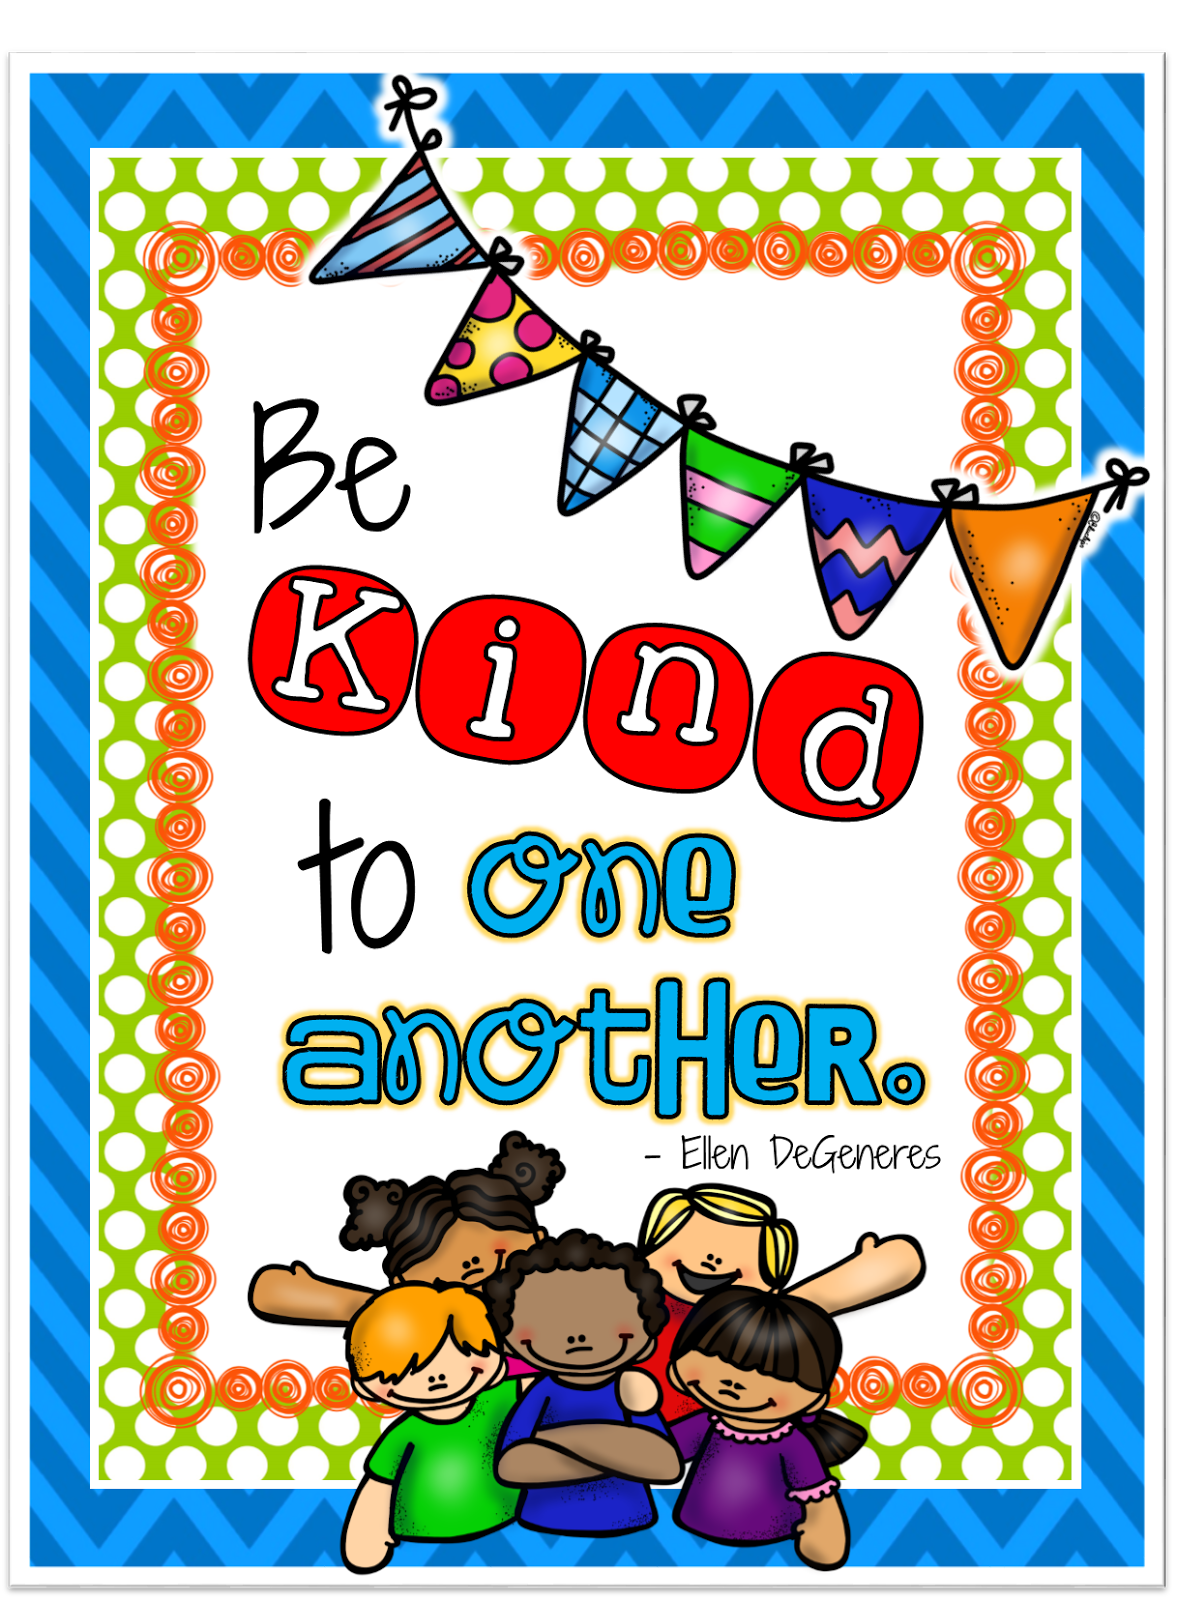 Be kind poster. To be kind. English Classroom posters. Be kind to one another. Be kind together